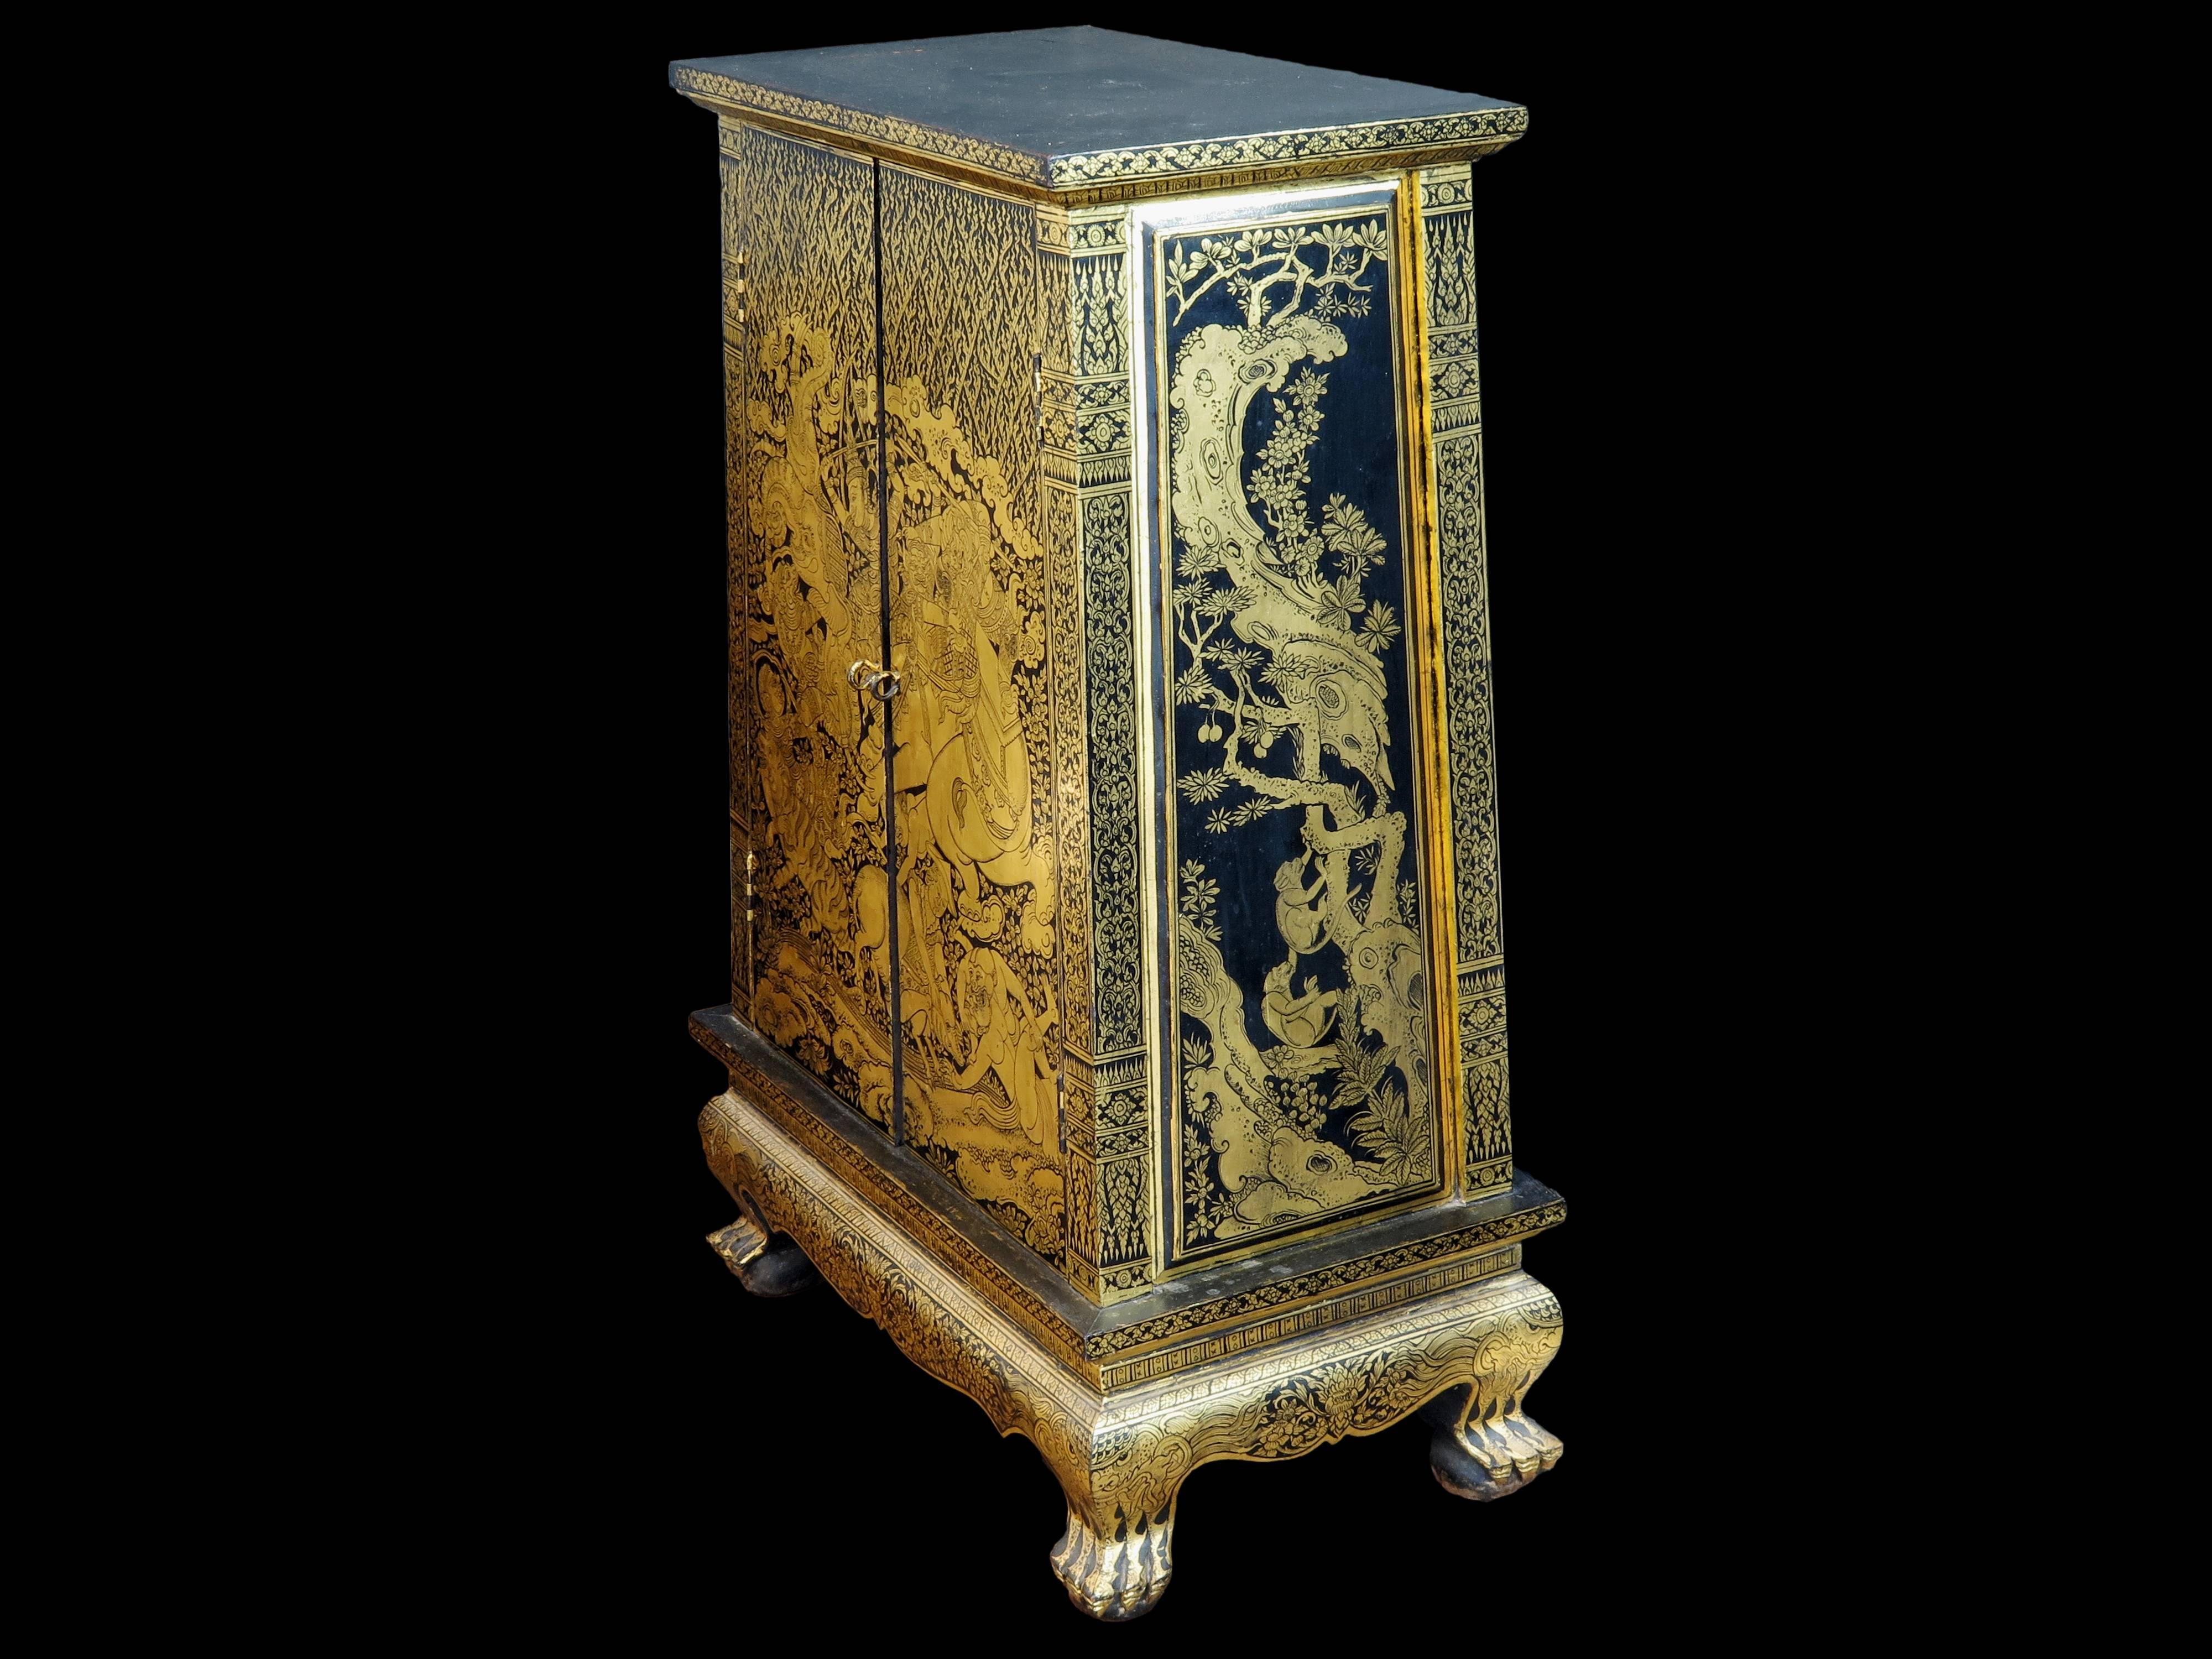 A stunning Thai black lacquer and gold leaf decorated teak wood manuscript cabinet, mid 20th century, Thailand.

Of slightly tapered form, with two doors and two interior shelves, the teak wood cabinet is supported by four clawed feet. 
Built from